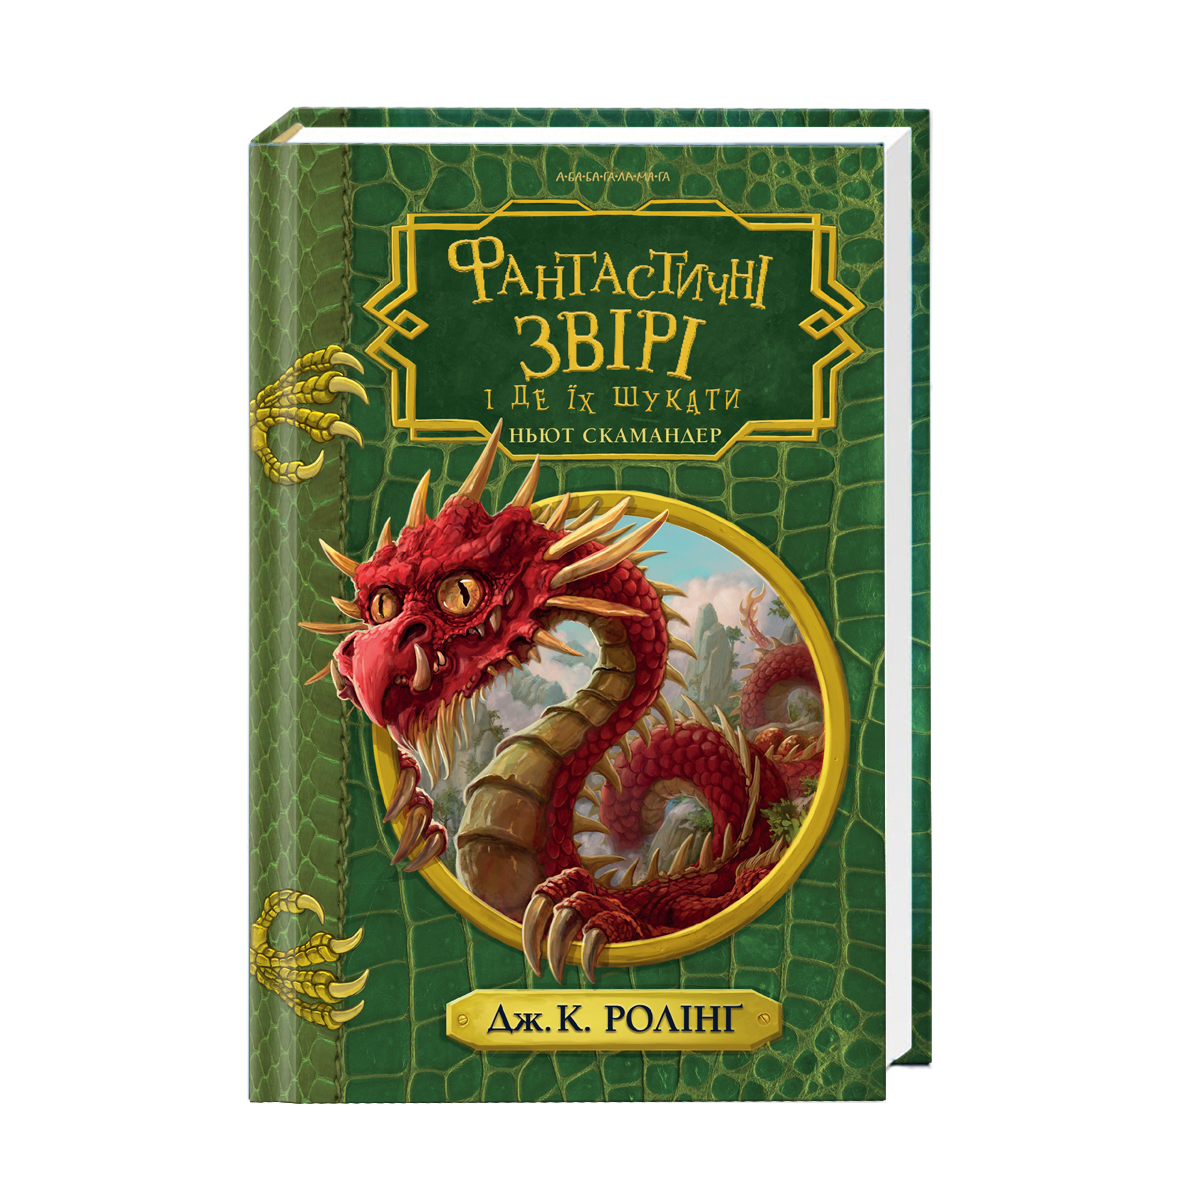 Fantastic Beasts new edition book
                                  cover